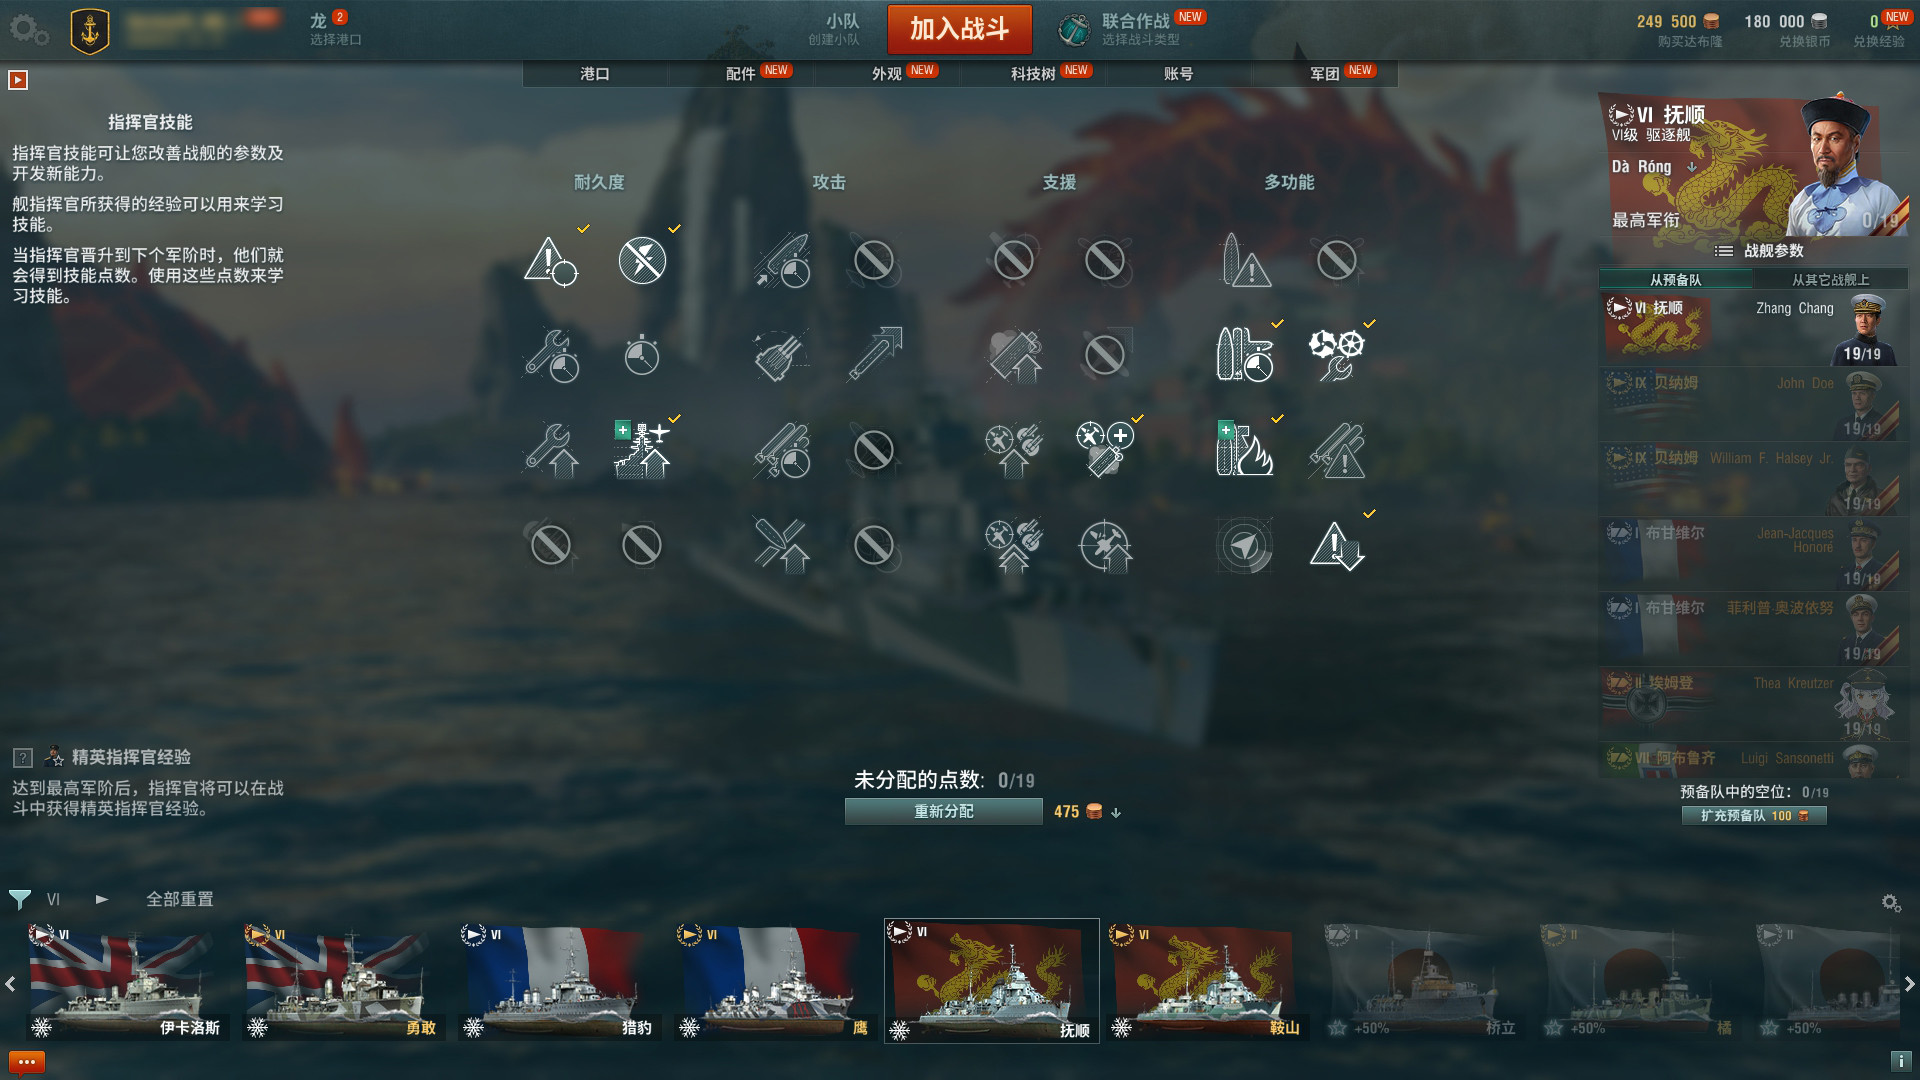 store steampowered app 552990 world warships